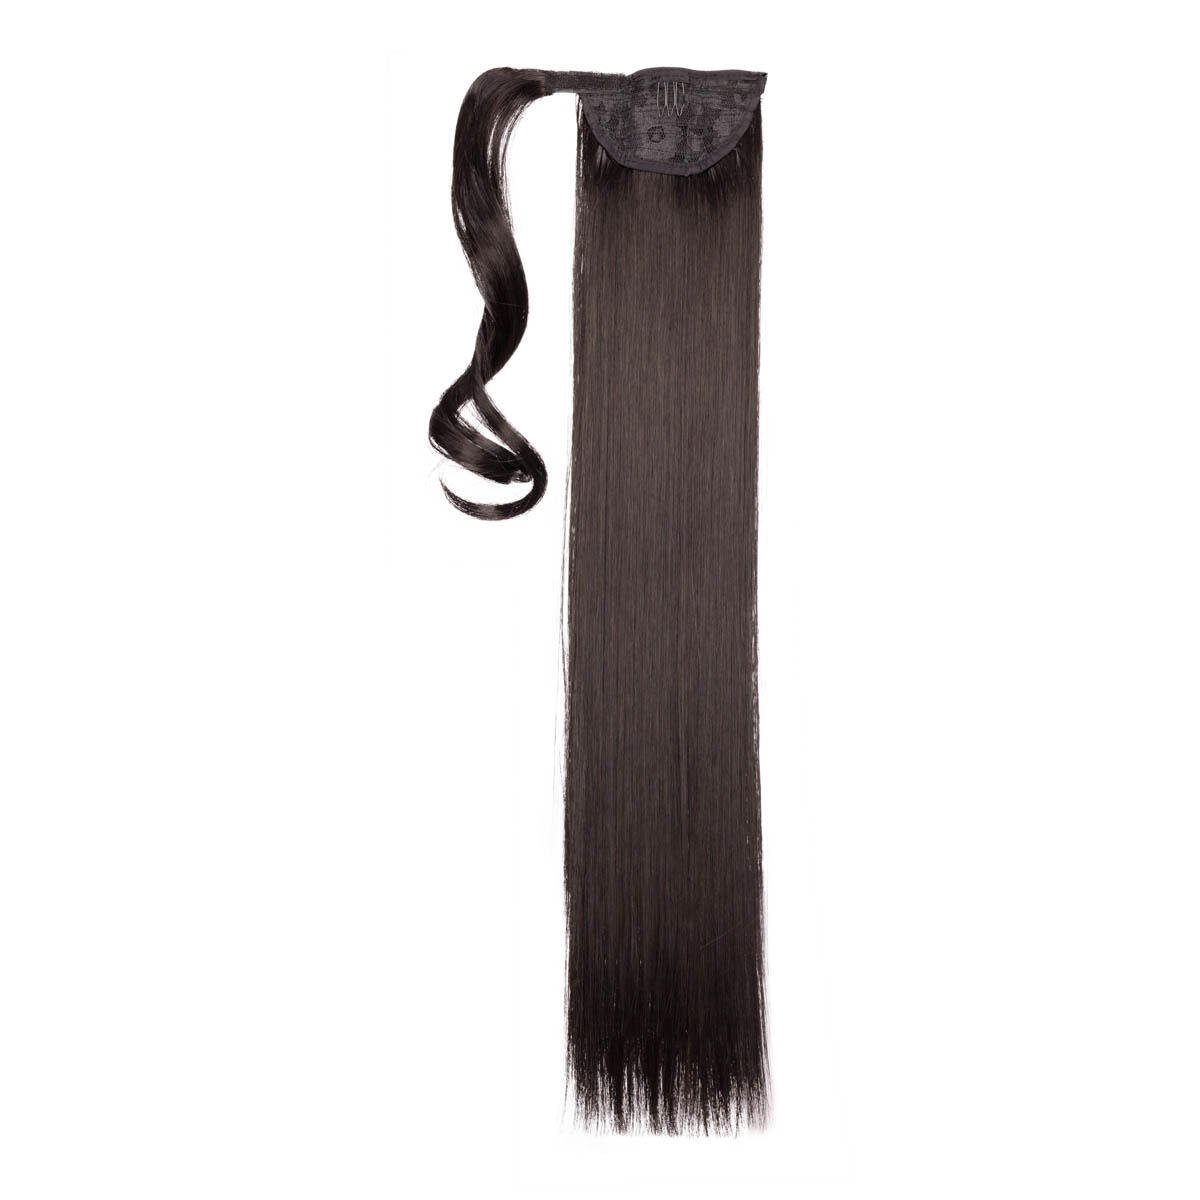 Clip-in Ponytail Synthetic 1.2 Black Brown 50 cm